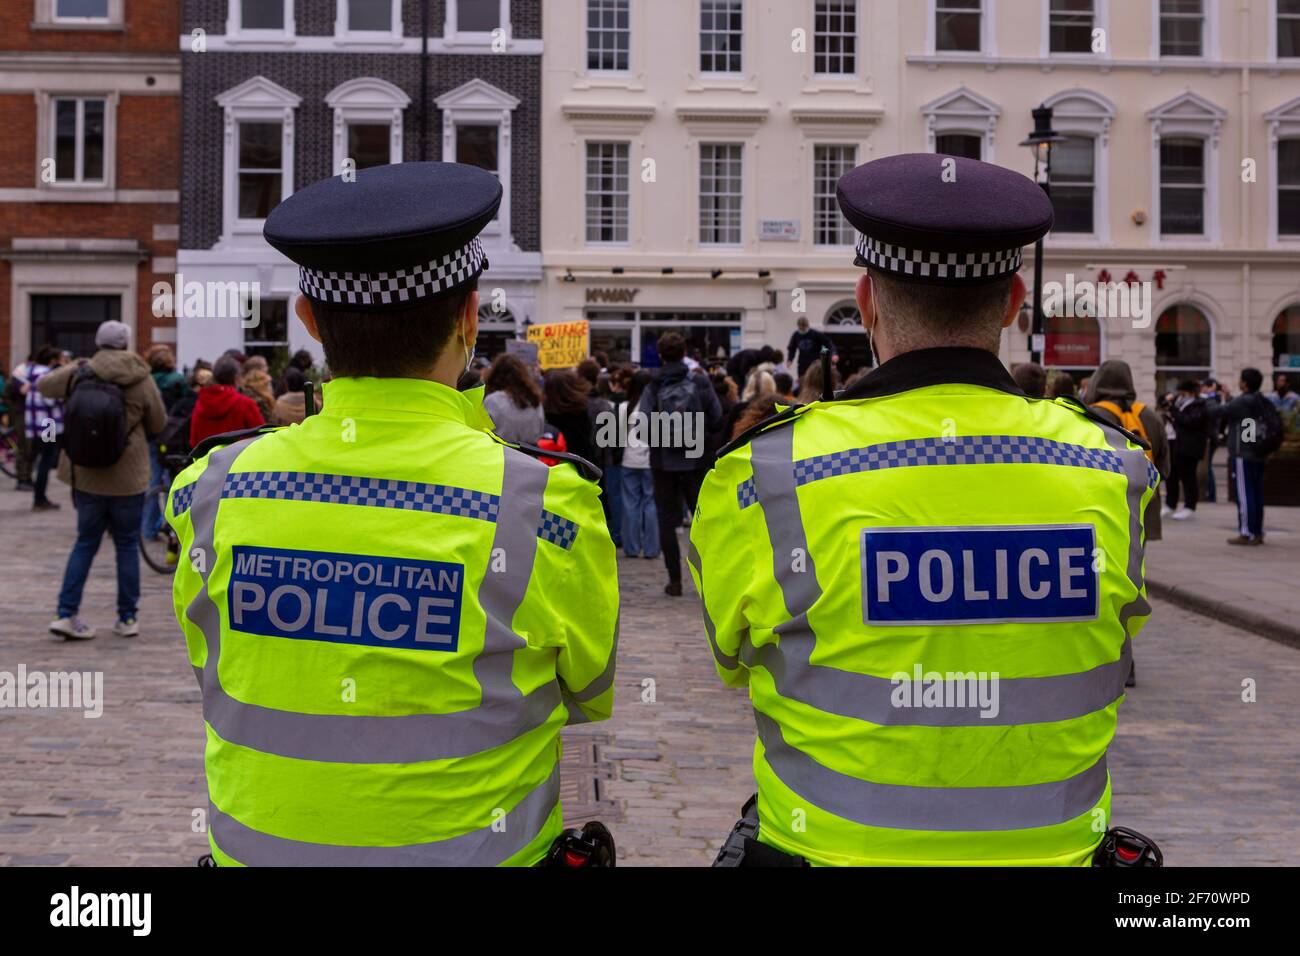 Police officers looking at protesters during the demonstration.A Month after kidnap and murder of 33-year-old Sarah Everard, women's rights protesters marched in central London chanting slogans and protested what they said had been a lack of action by government and police services. Sarah Everard disappeared on March 3rd and her body was found on March 12th. Stock Photo